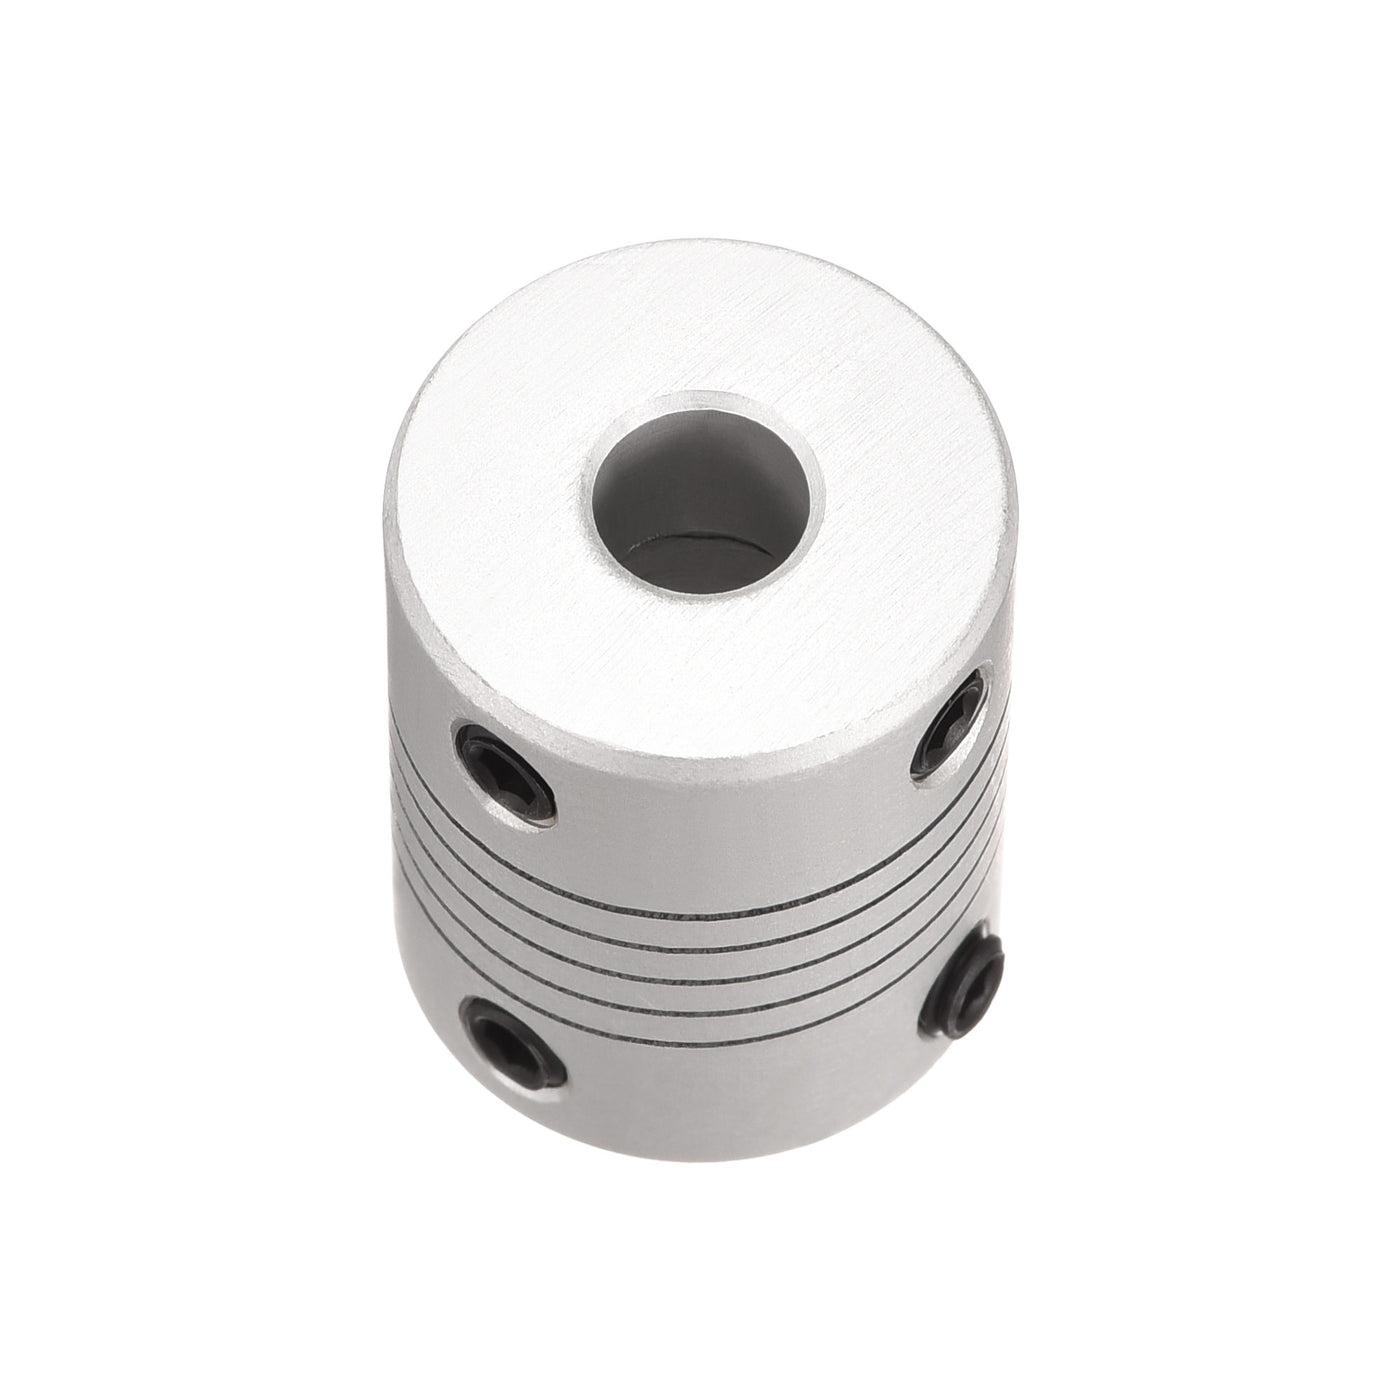 uxcell Uxcell 6.35mm to 8mm Aluminum Alloy Shaft Coupling Flexible Coupler L25xD19 Silver,5pcs